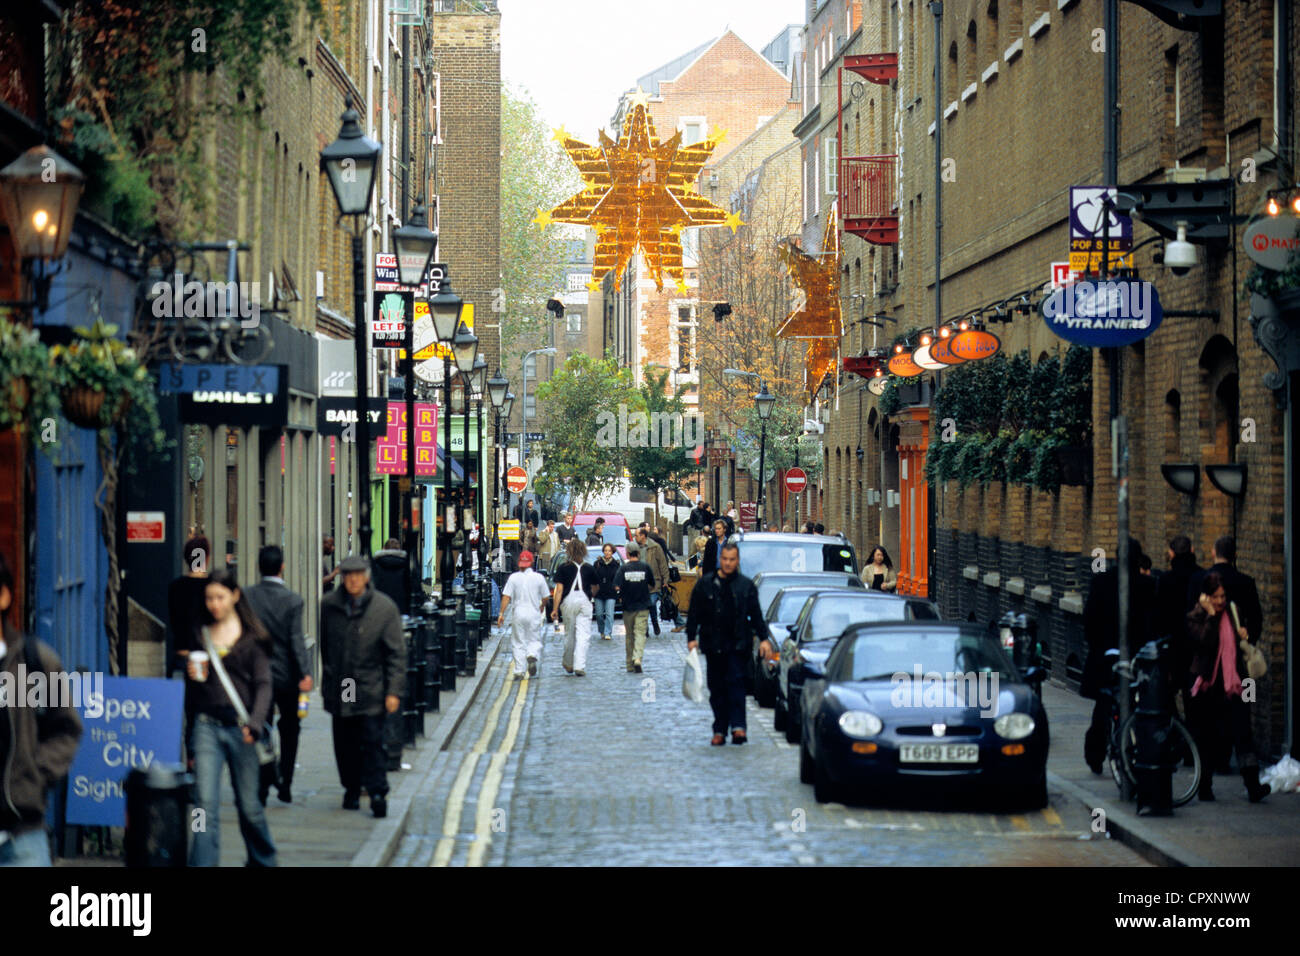 United Kingdom, London, Seven Dials, Earlham street, one of the main shopping streets of London Stock Photo